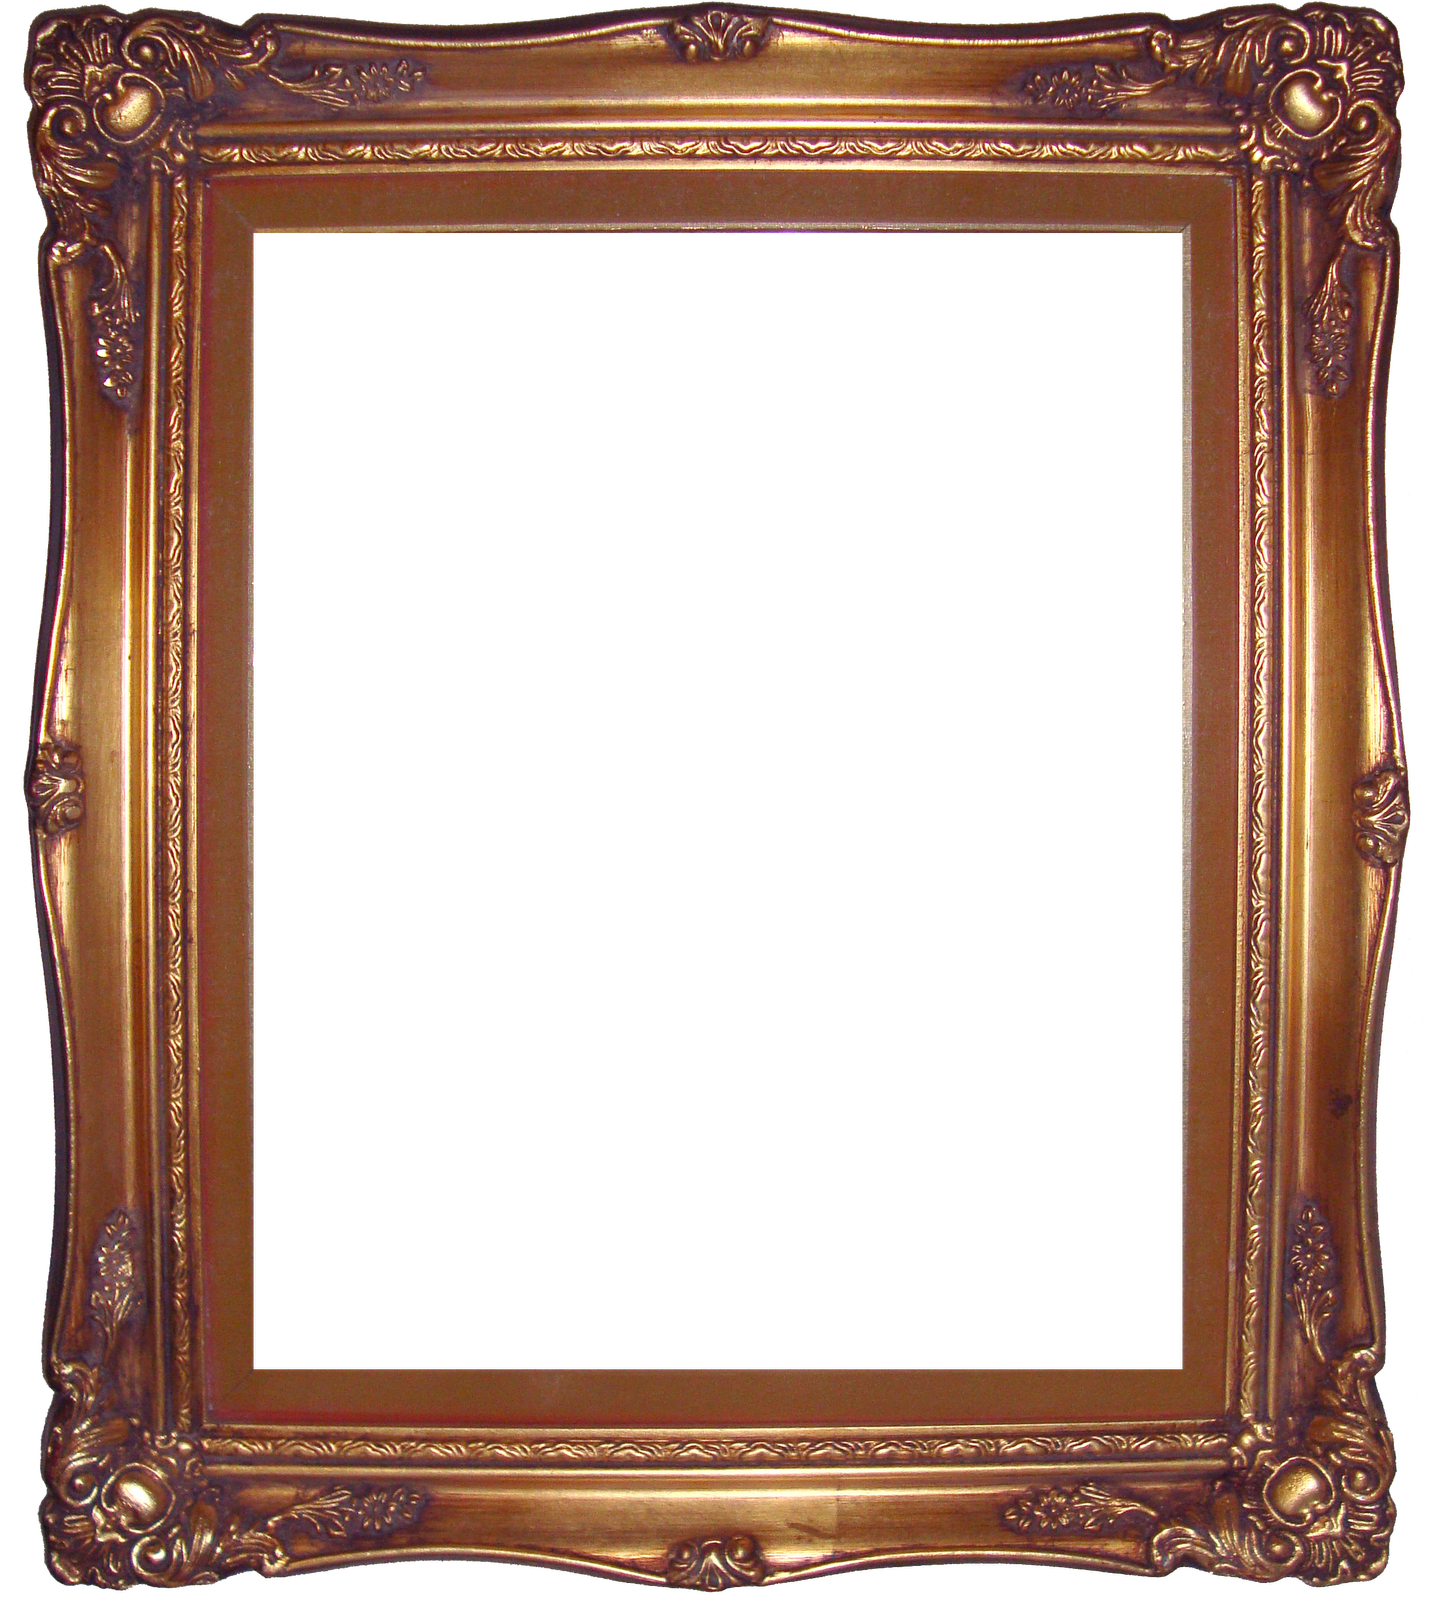 photography clipart frame